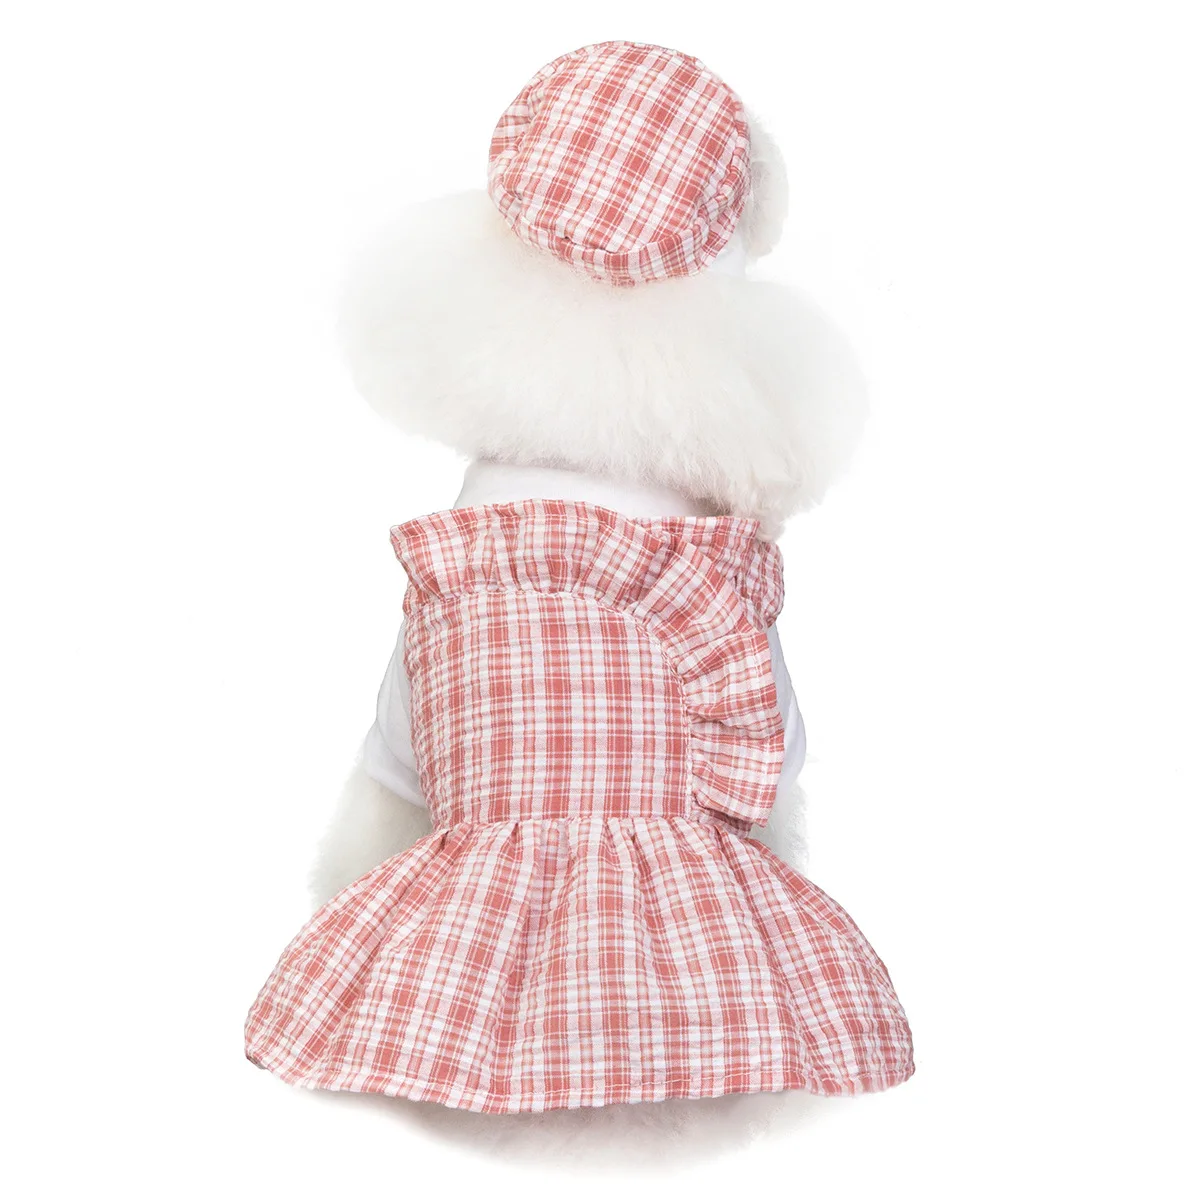 

Pets Dog Dress Clothes Cute Princess Party Dress Set With Hat For Chihuahua Teddy, 3 colors